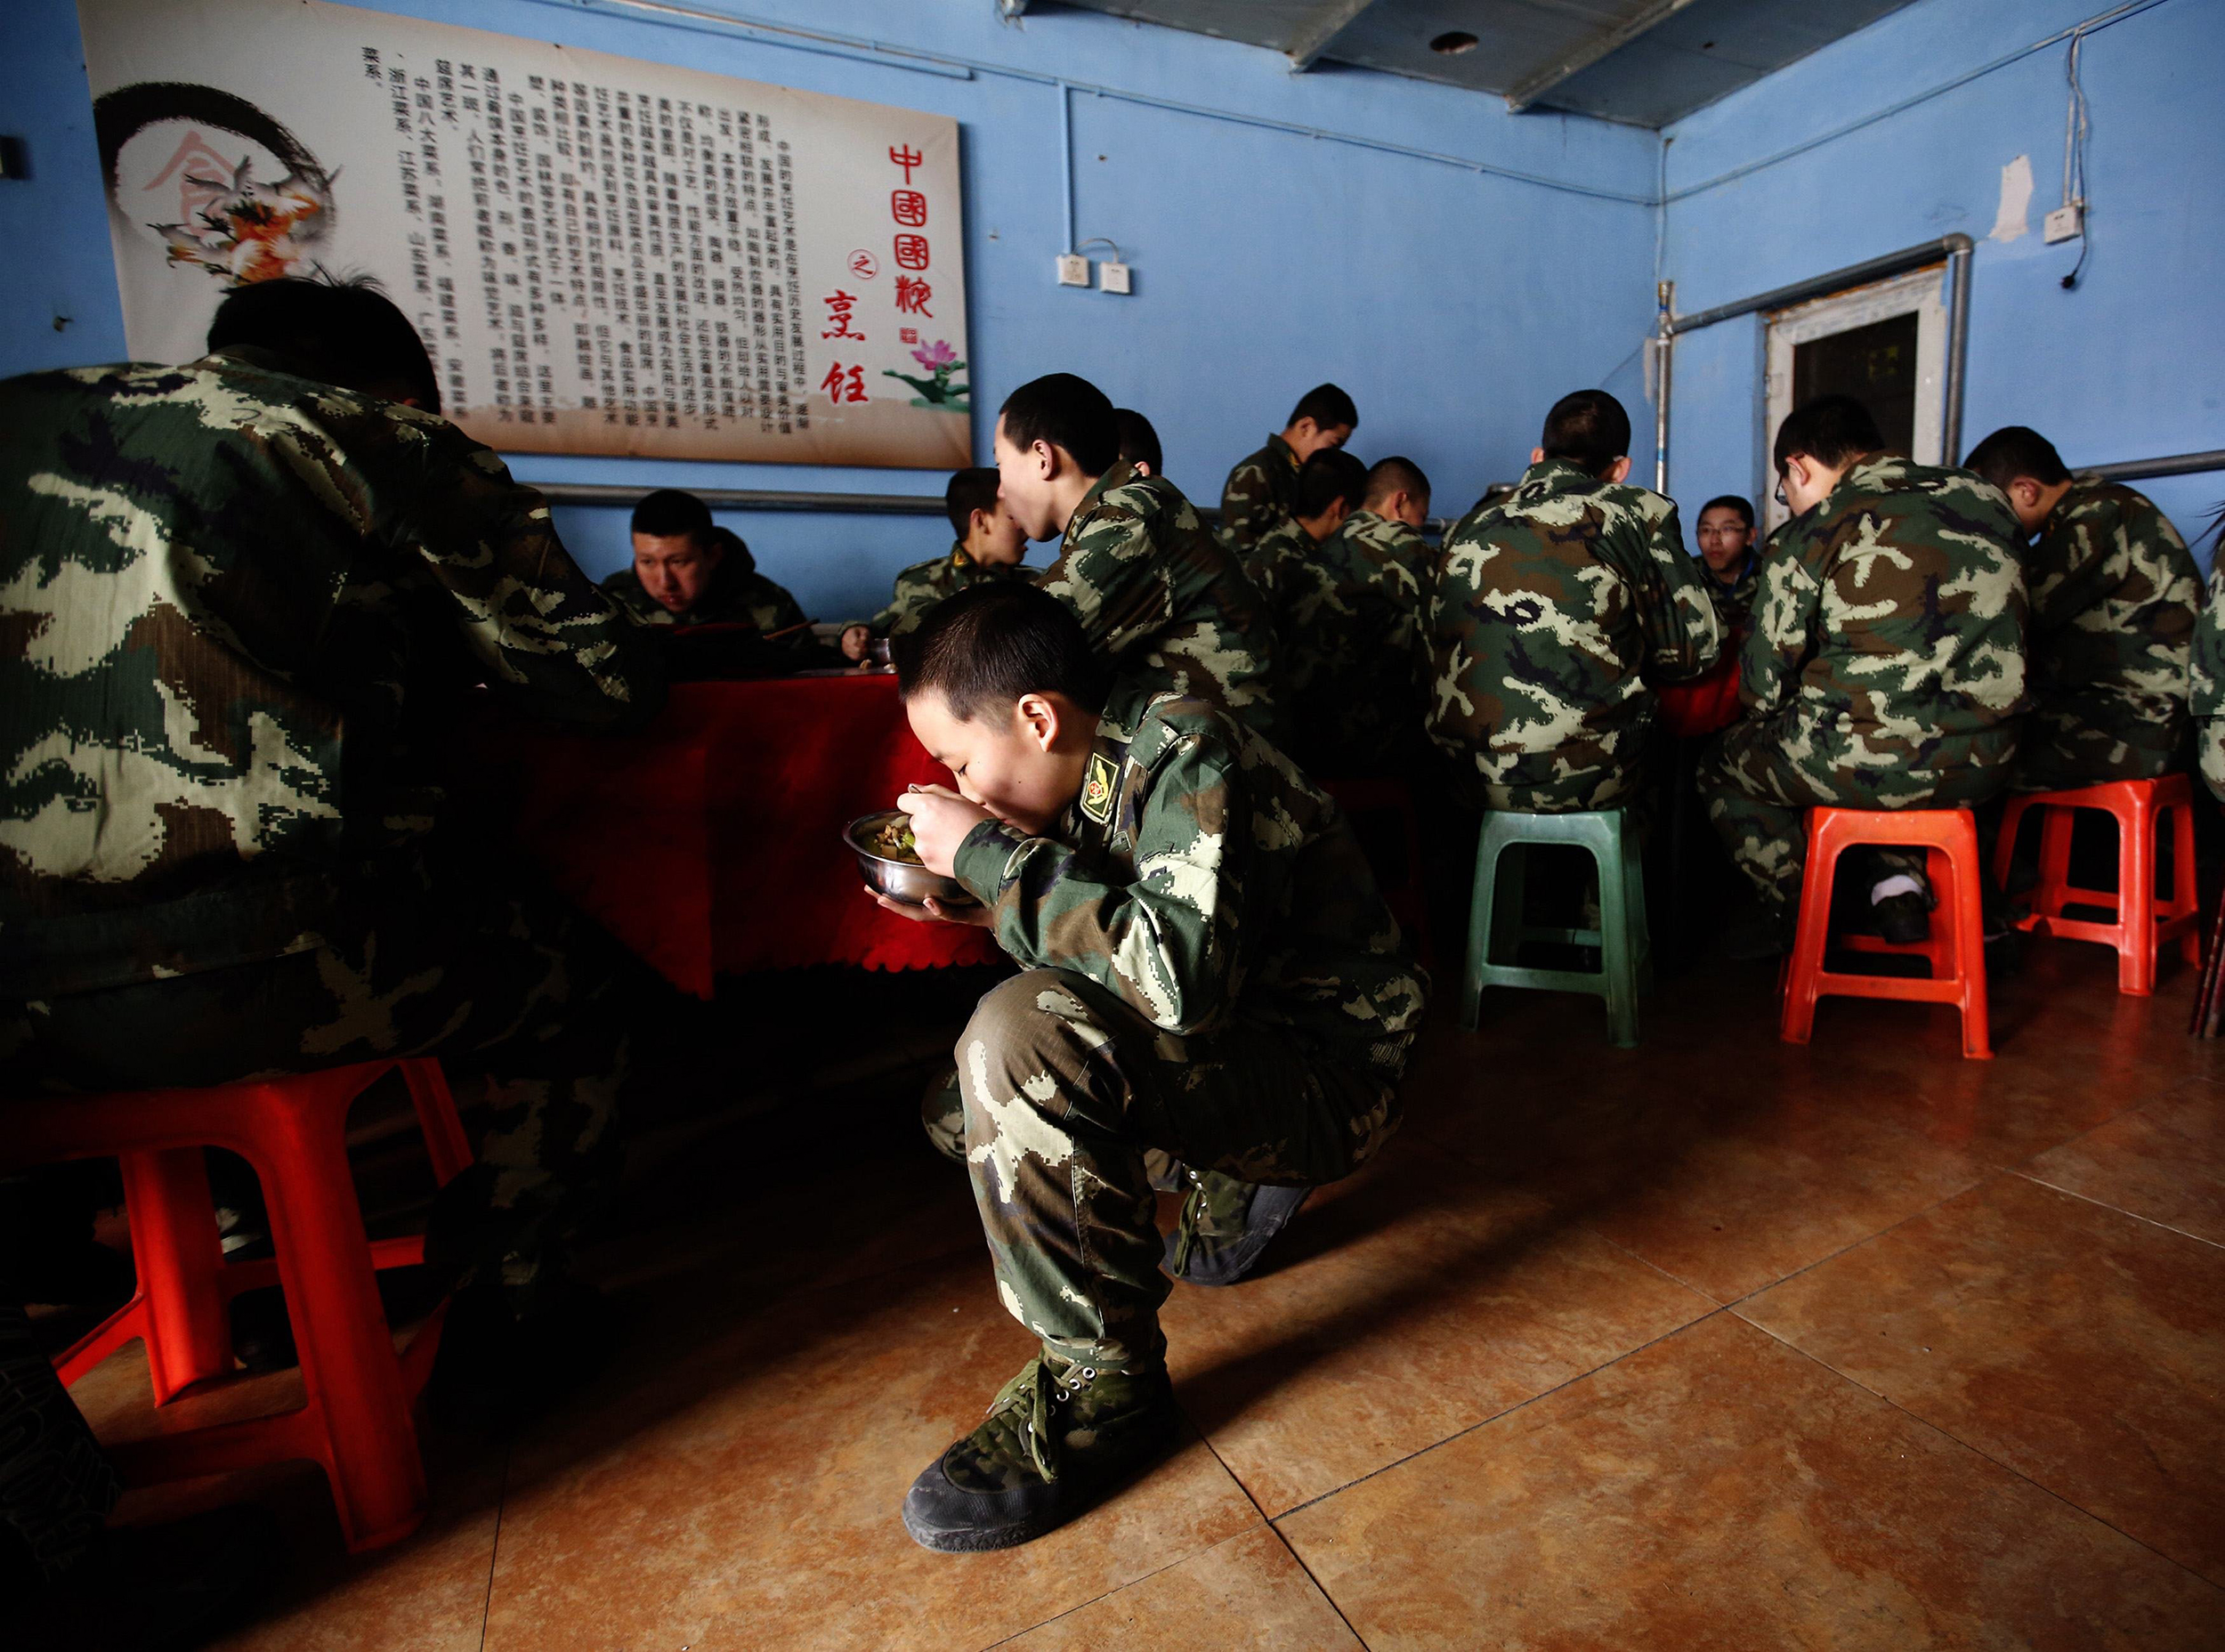 Game Over: Can Boot Camp Cure China's Young Internet Addicts?